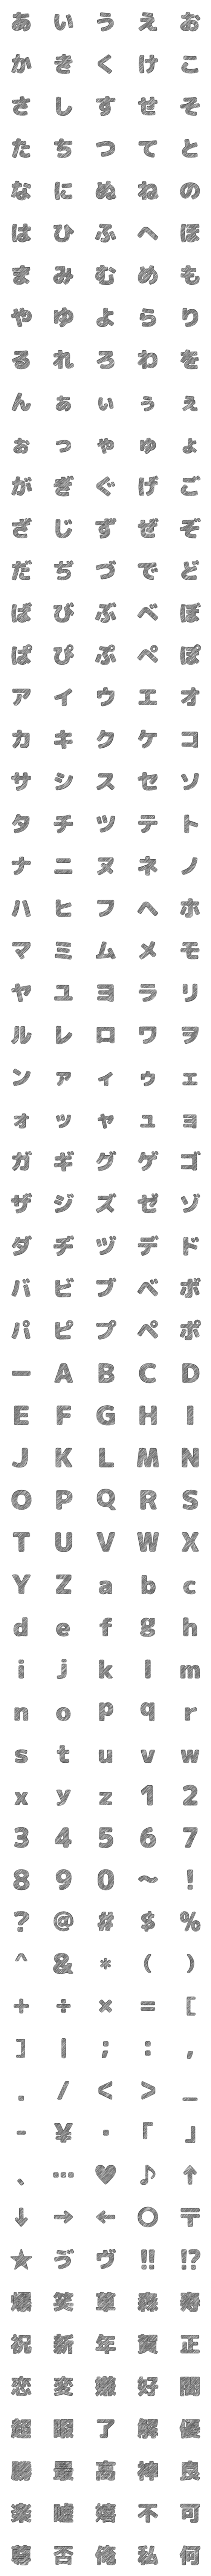 [LINE絵文字]シンプル黒鉛筆デコ文字-丸ゴシック-の画像一覧